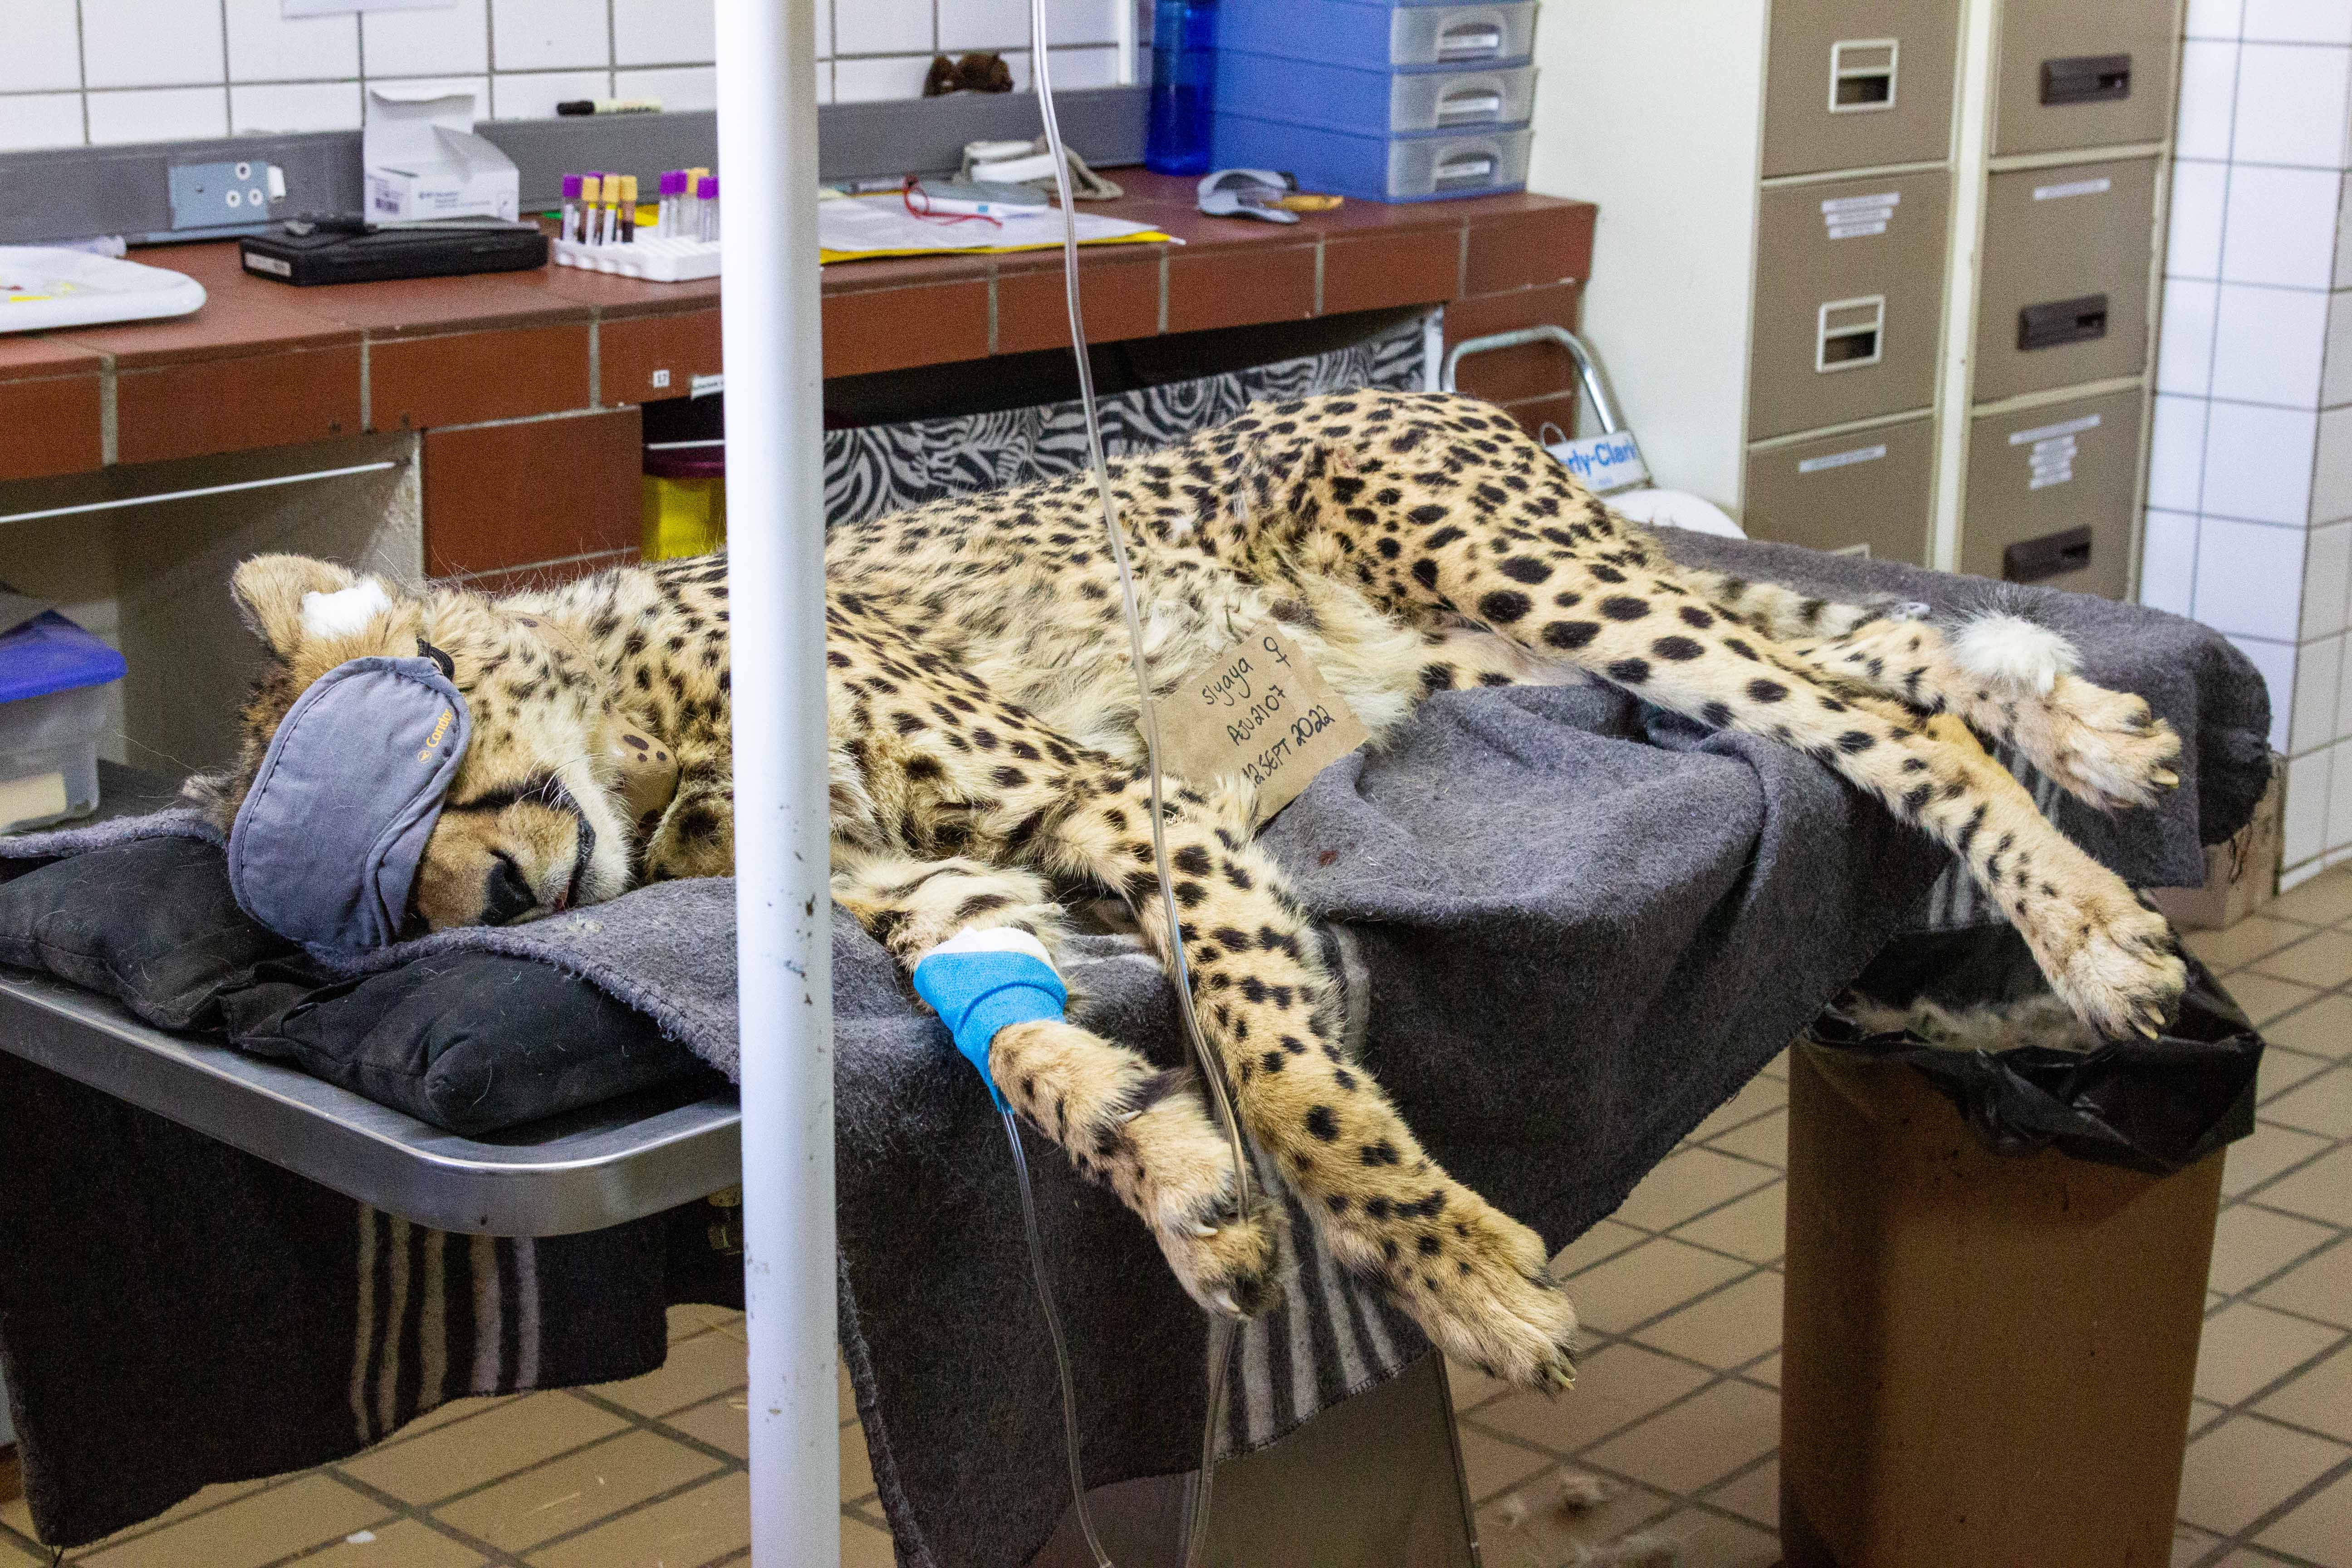 Each cheetah has been vaccinated, fitted with a satellite collar, and kept in isolation at the CCF Centre in Otjiwarongo before releasing them to India. The cheetahs were hand-picked based on an assessment of health, wild disposition, hunting skills, and ability to contribute genetics that will result in a strong founder population.